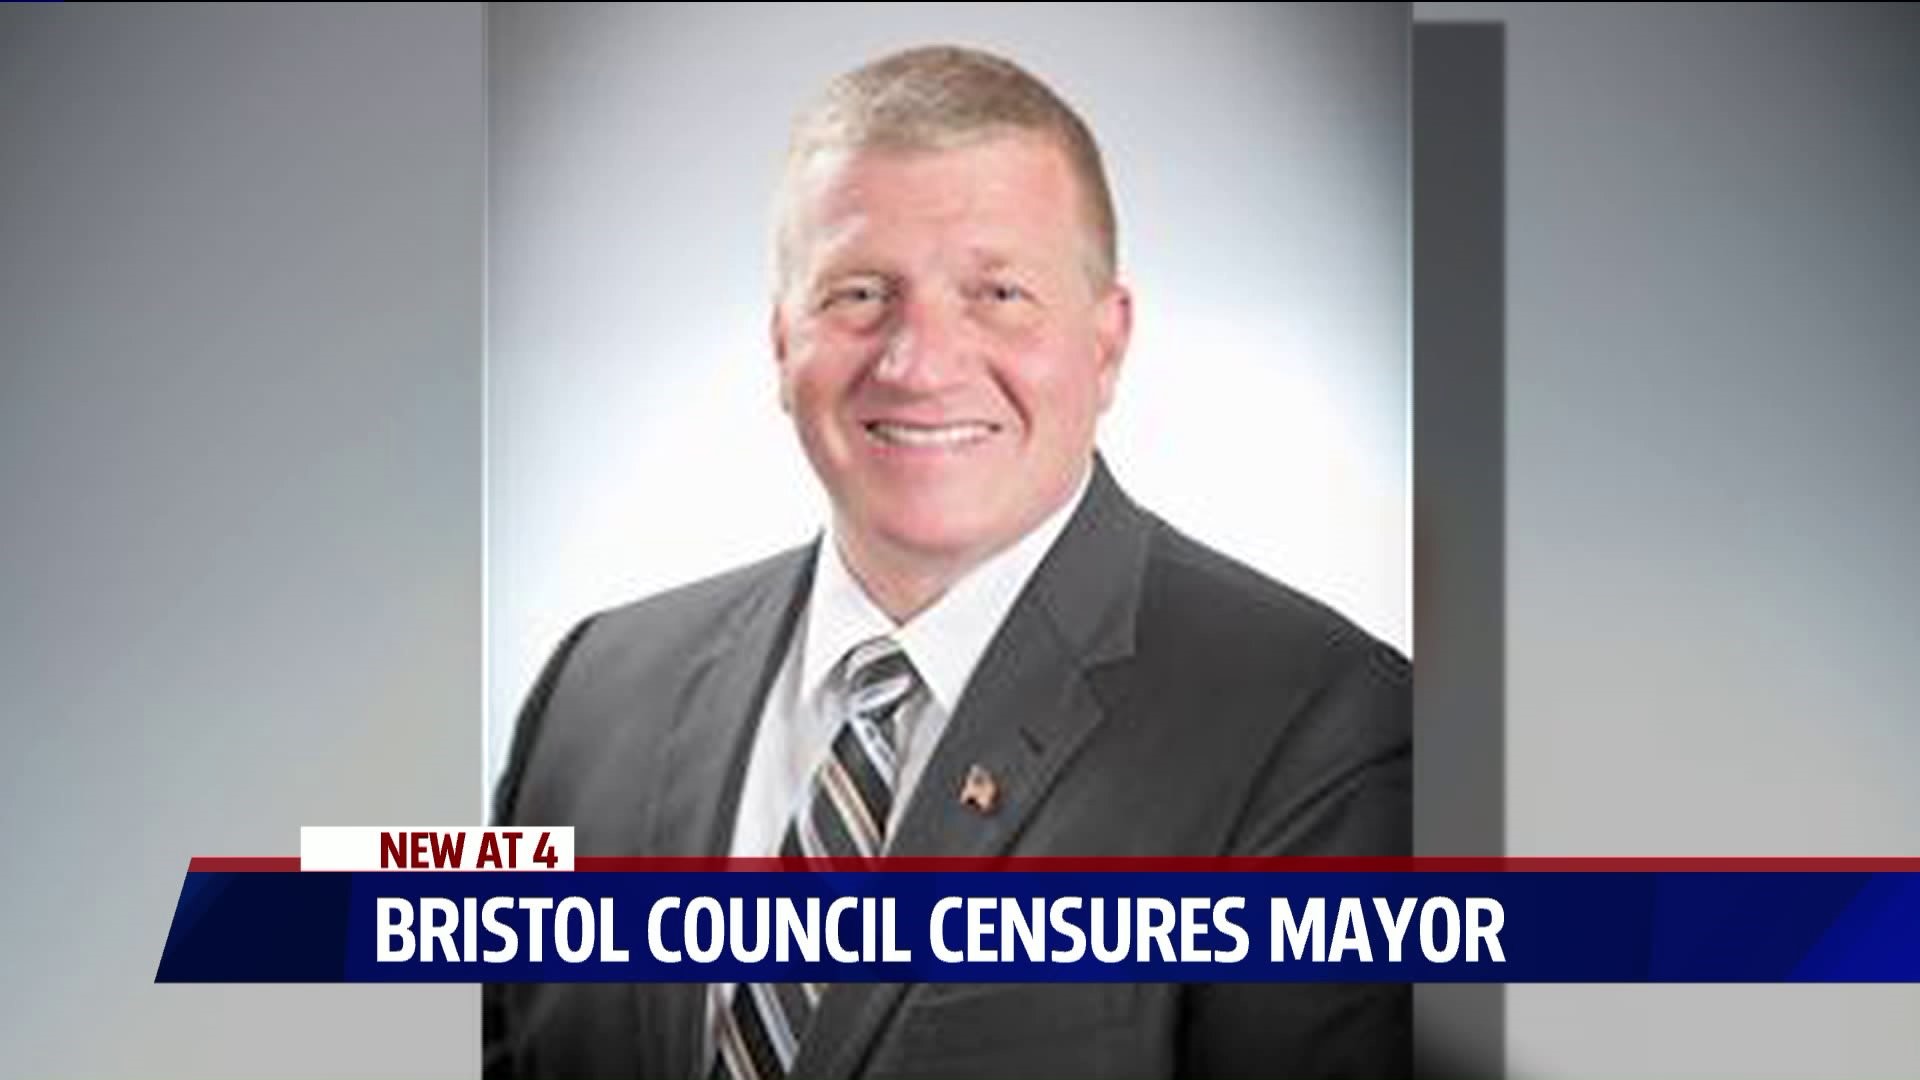 Bristol City Council Censures Mayor Over Sexual Harassment Case